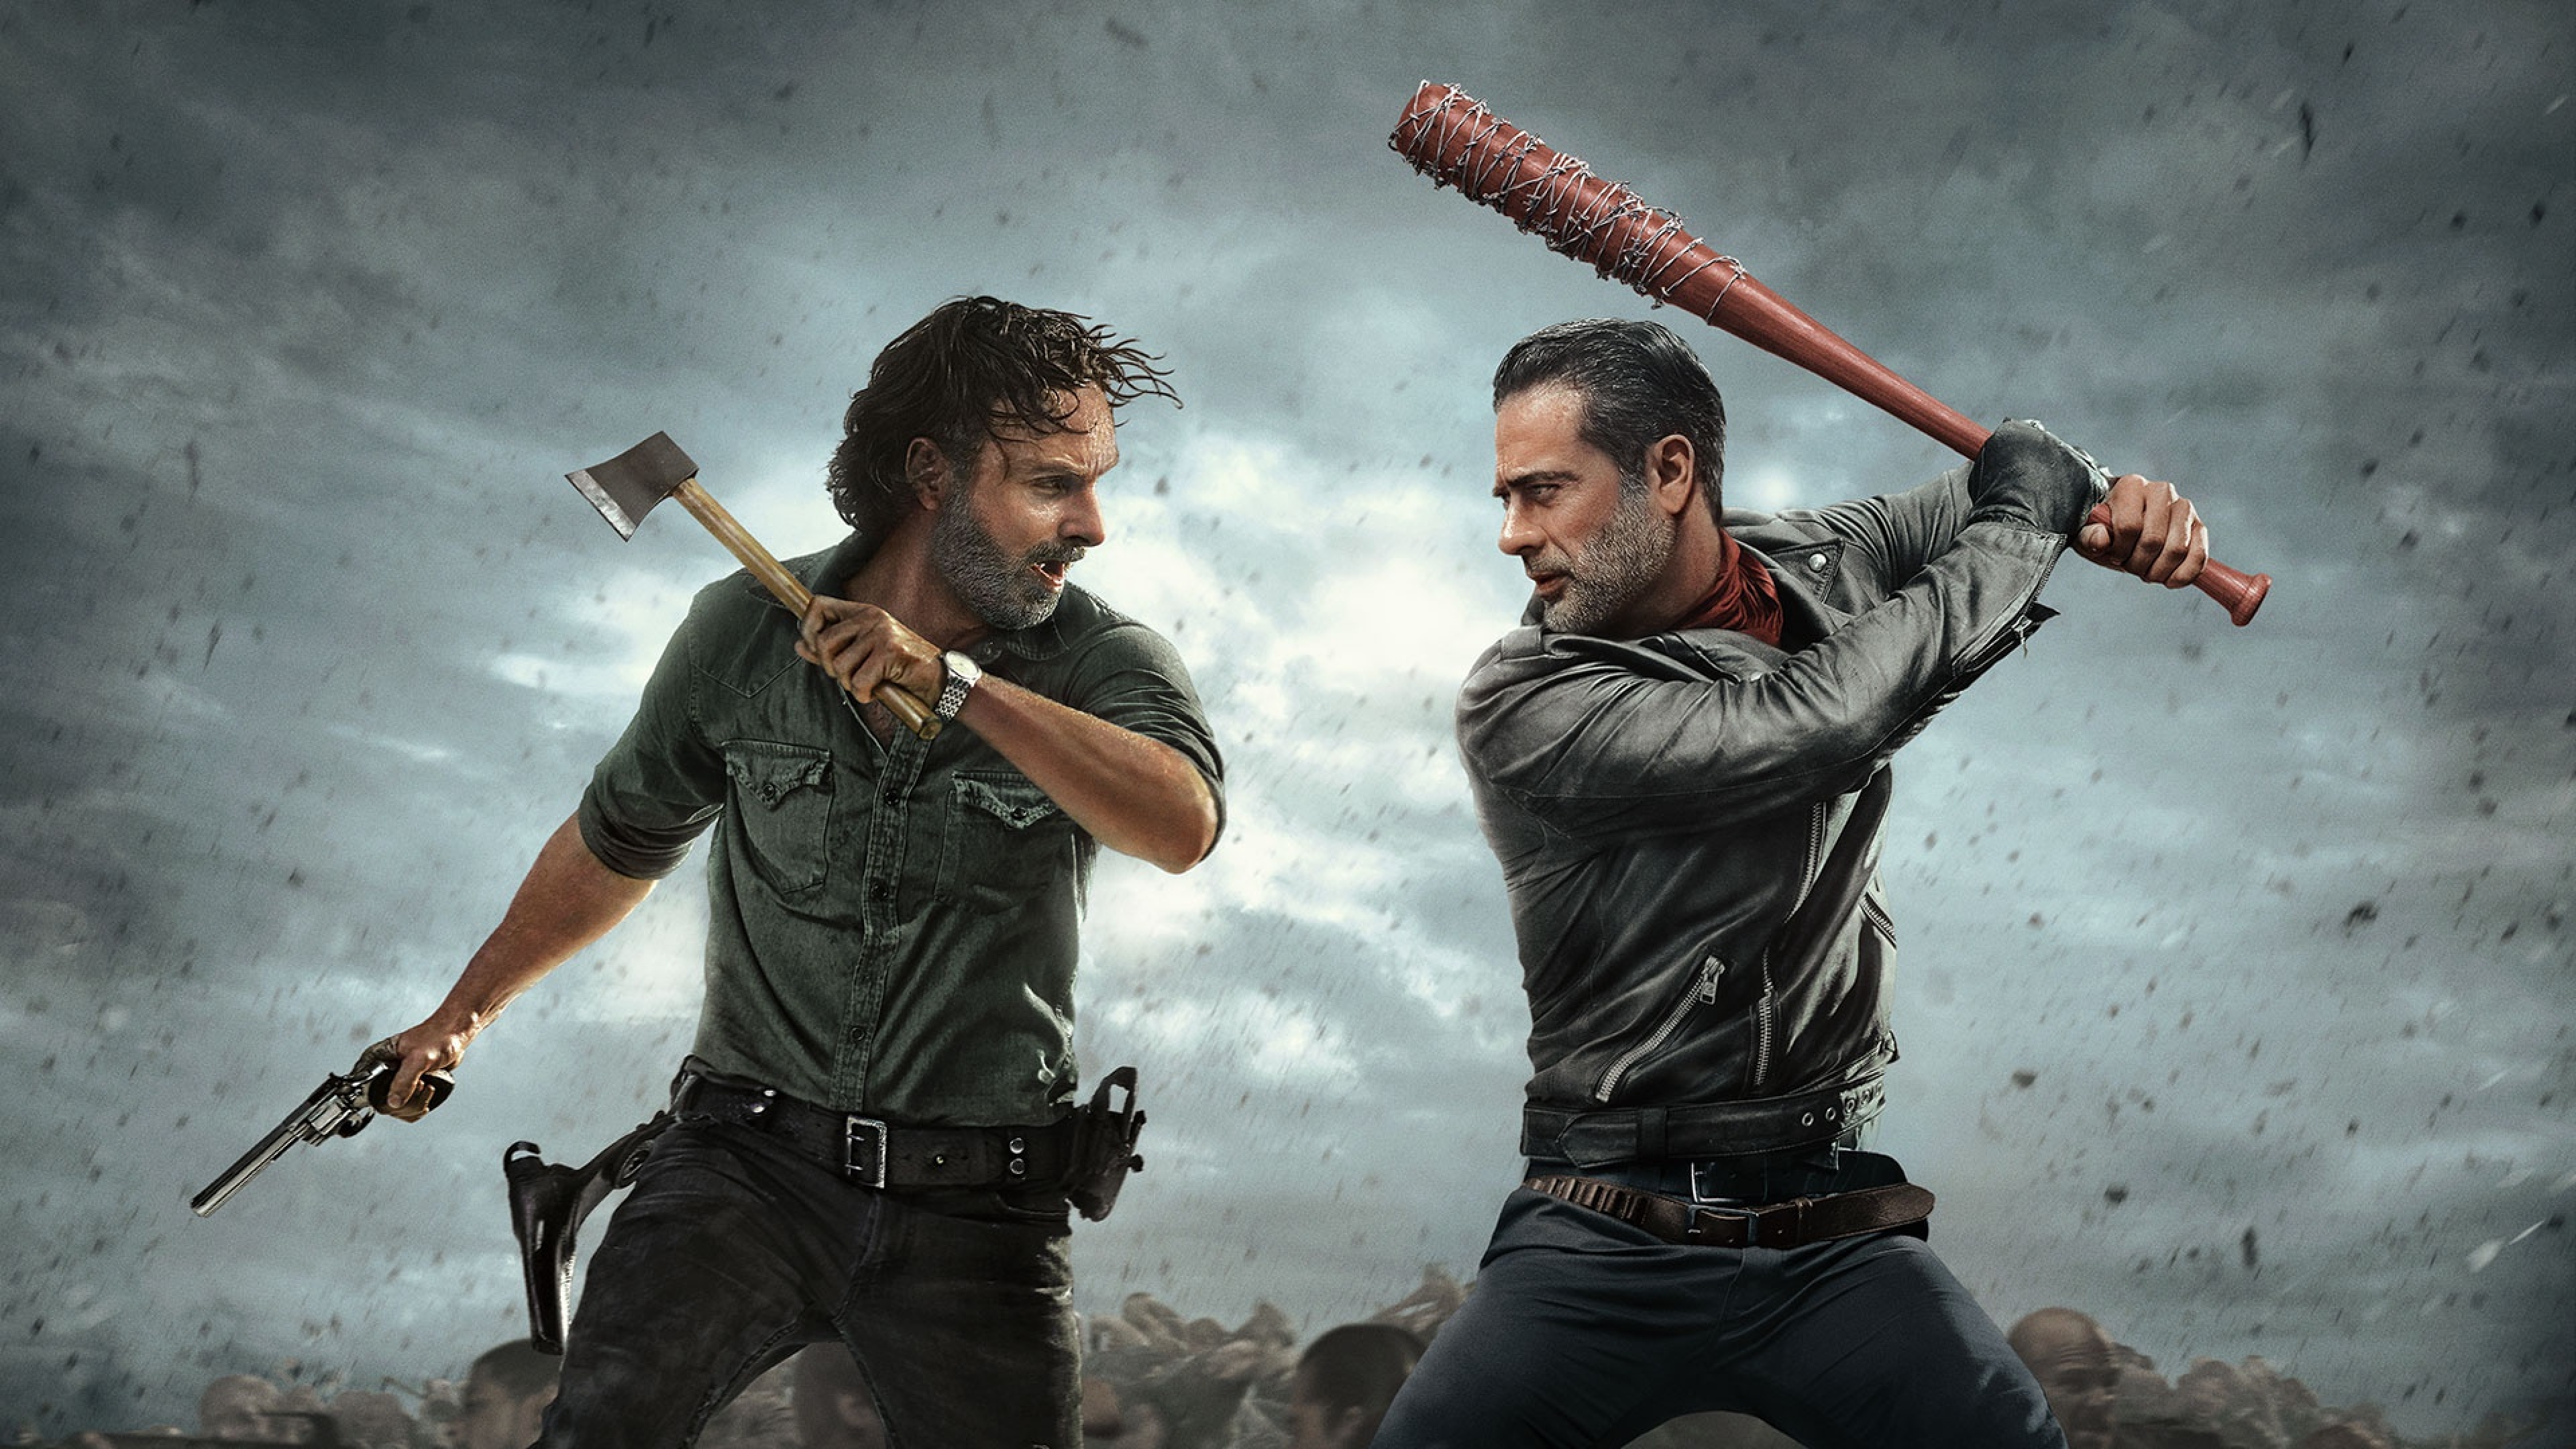 3840x2160 The Walking Dead Andrew Lincoln And Jeffrey Dean Morgan 4k Wallpaper Hd Tv Series 4k Wallpapers Images Photos And Background Wallpapers Den